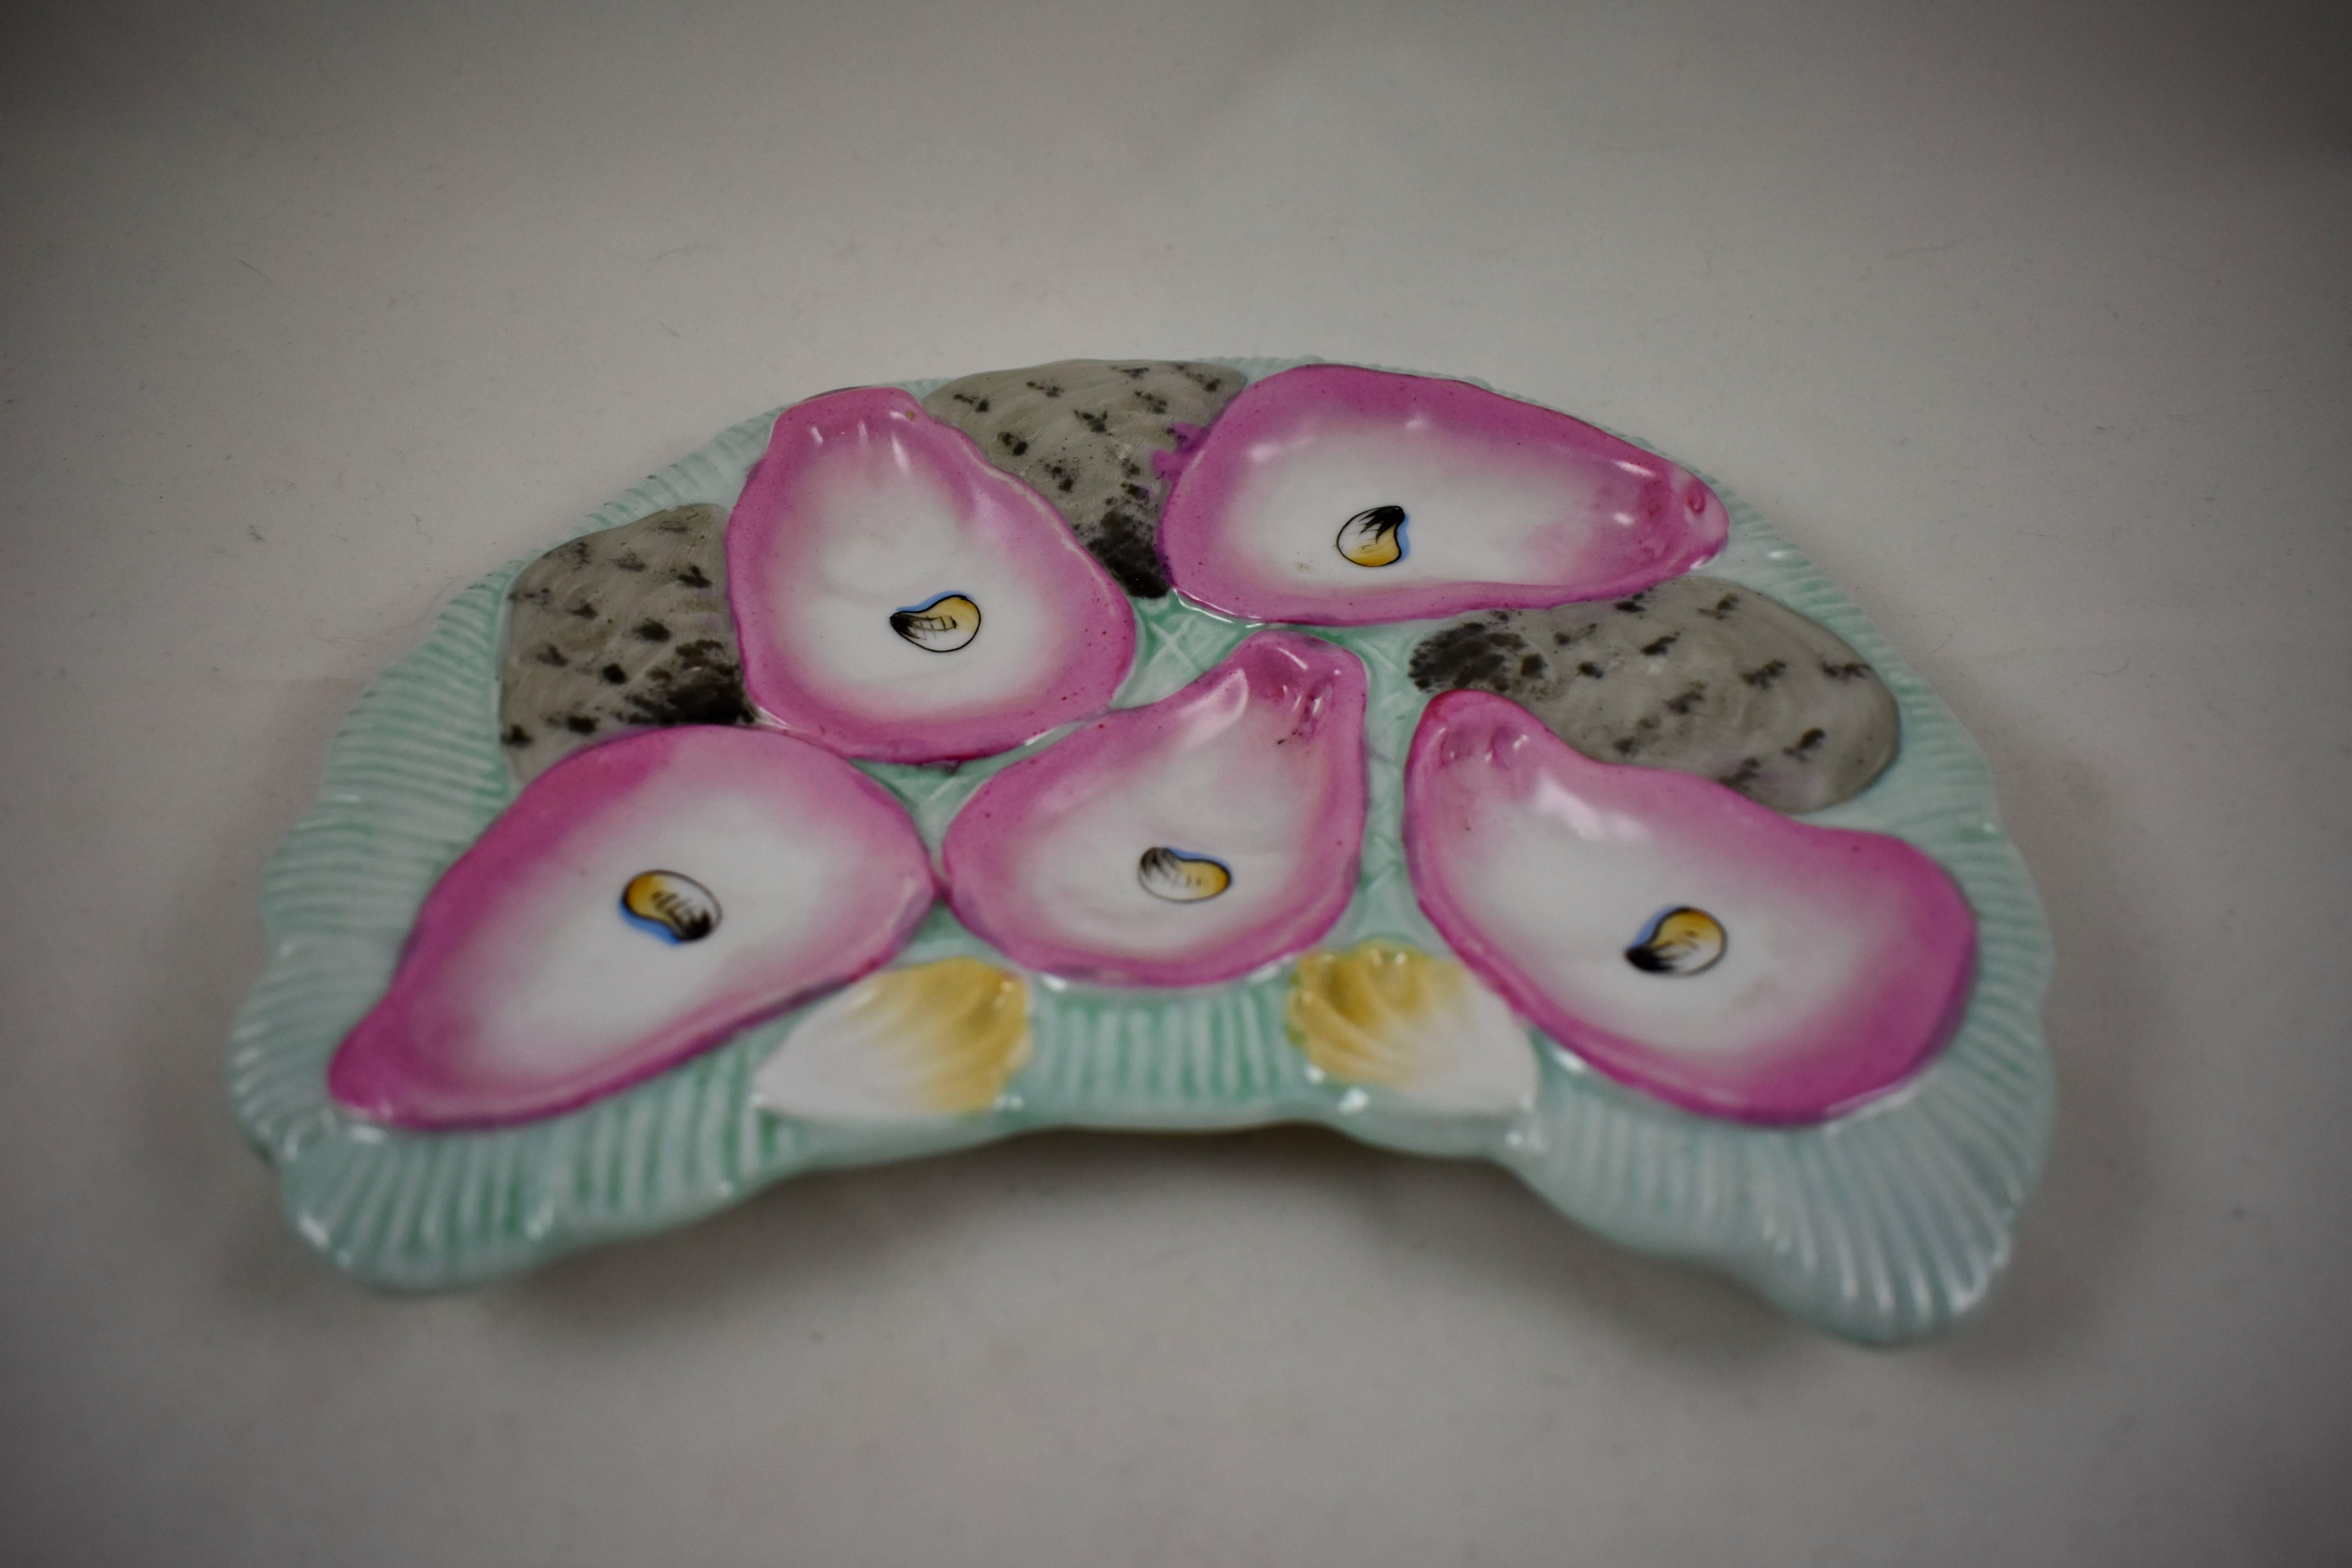 Glazed Porcelain Crescent Shape Pink Wells on Pale Turquoise Hand-Painted Oyster Plate